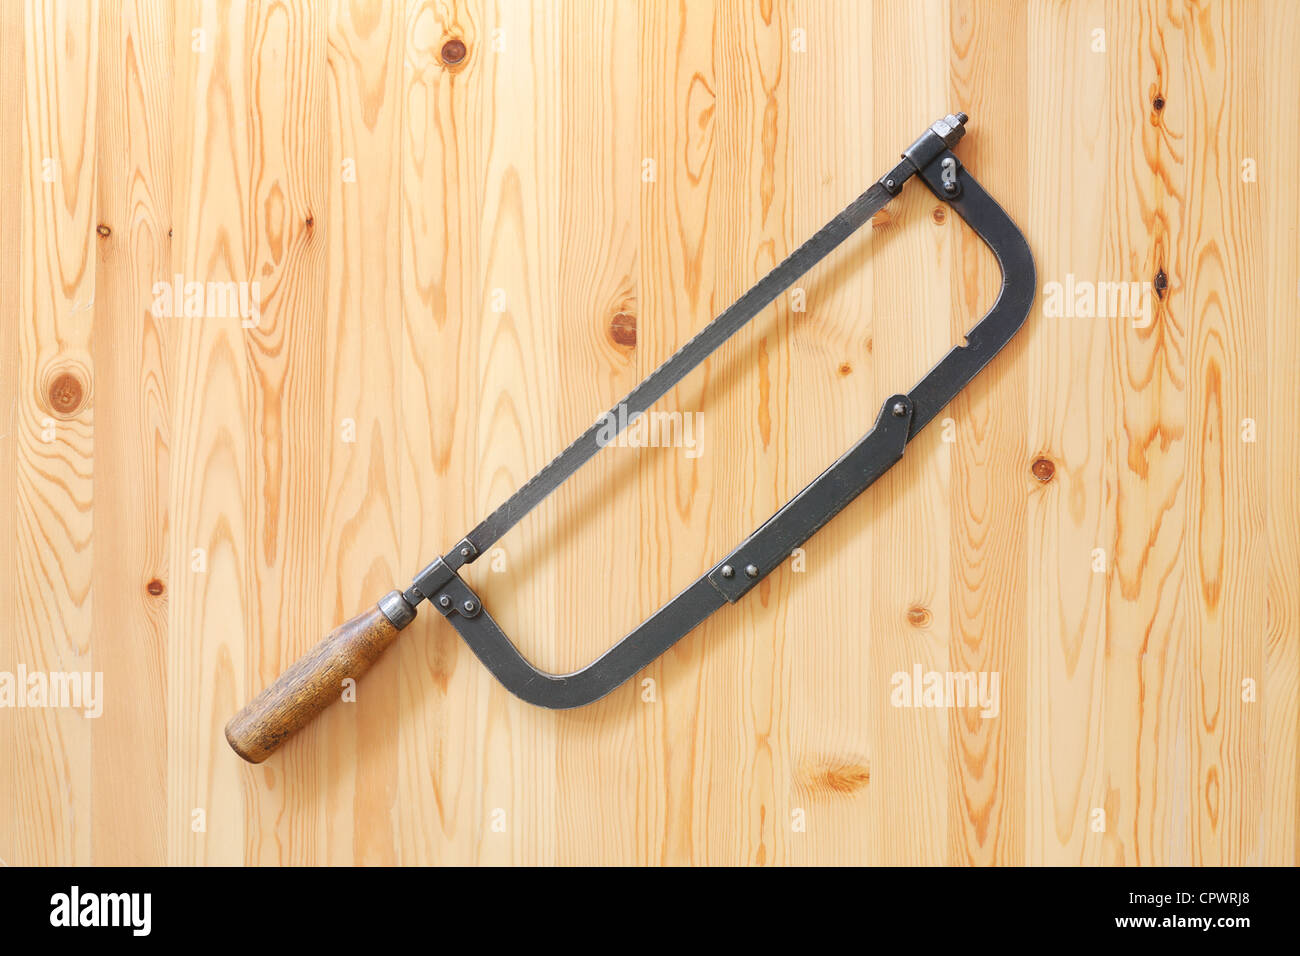 Old hacksaw on wooden surface Stock Photo